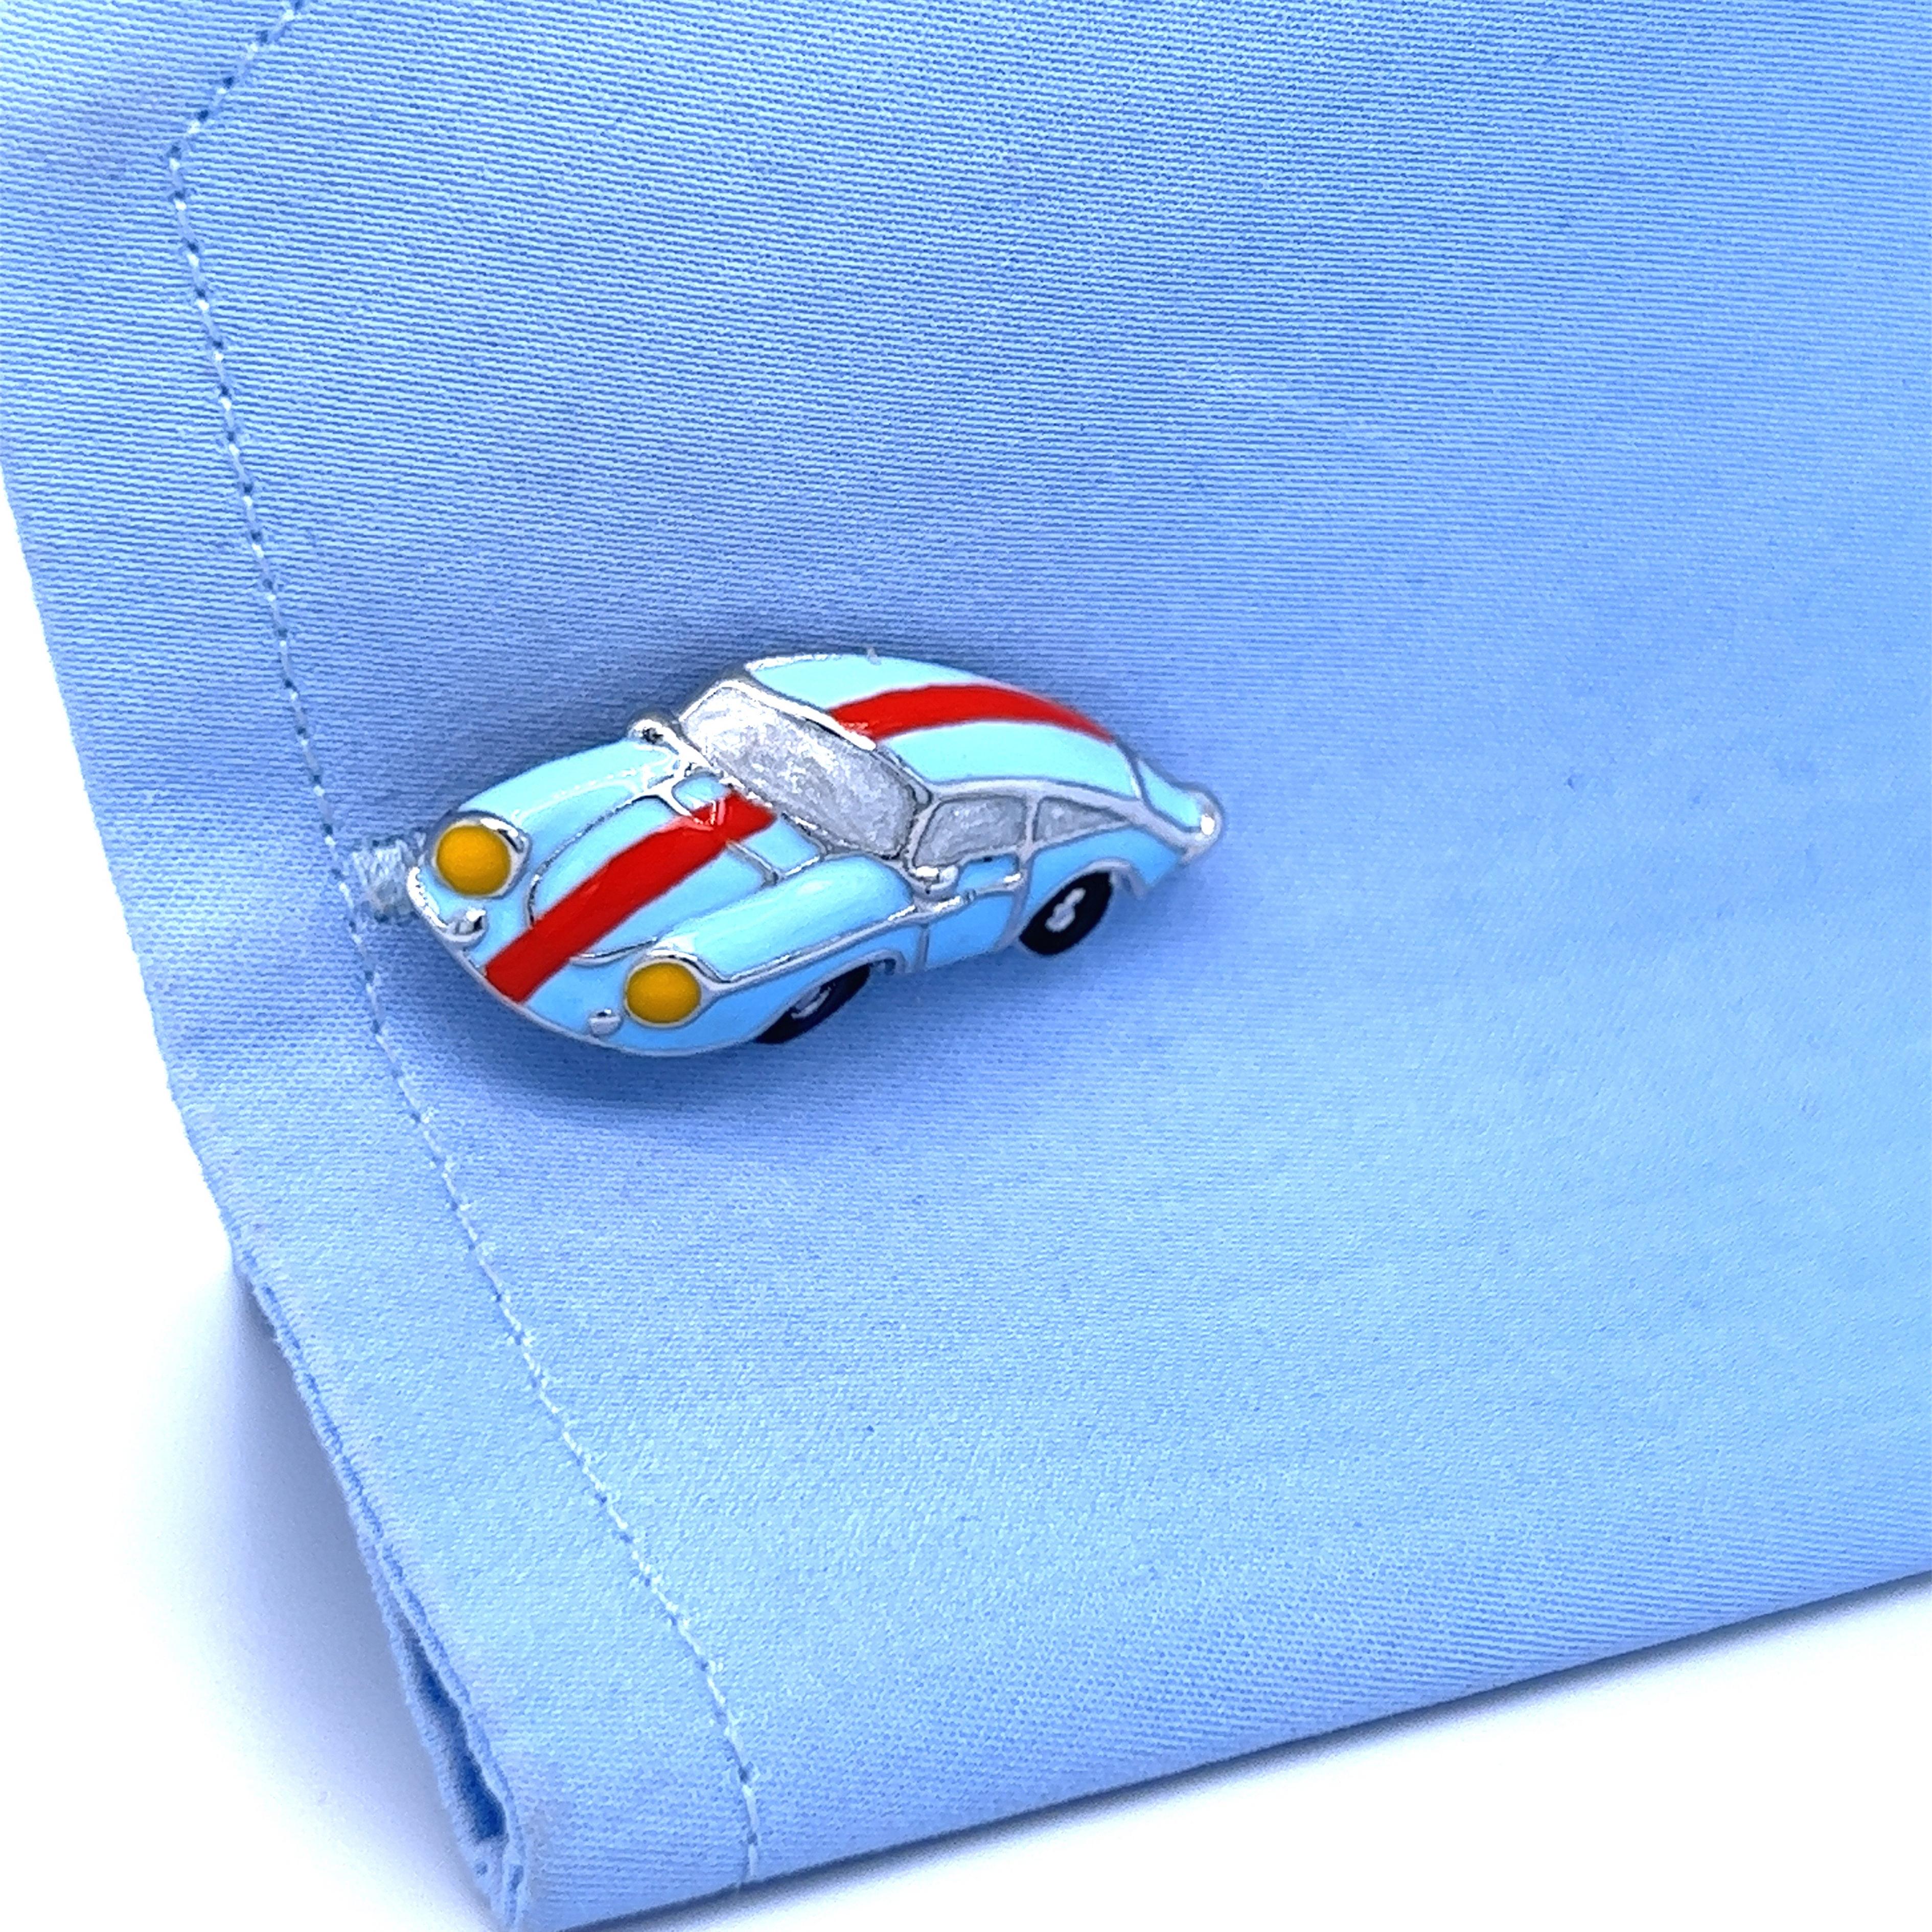 Contemporary Berca Le Man Racing Color 911 Porsche Shaped Enameled Sterling Silver Cufflinks For Sale